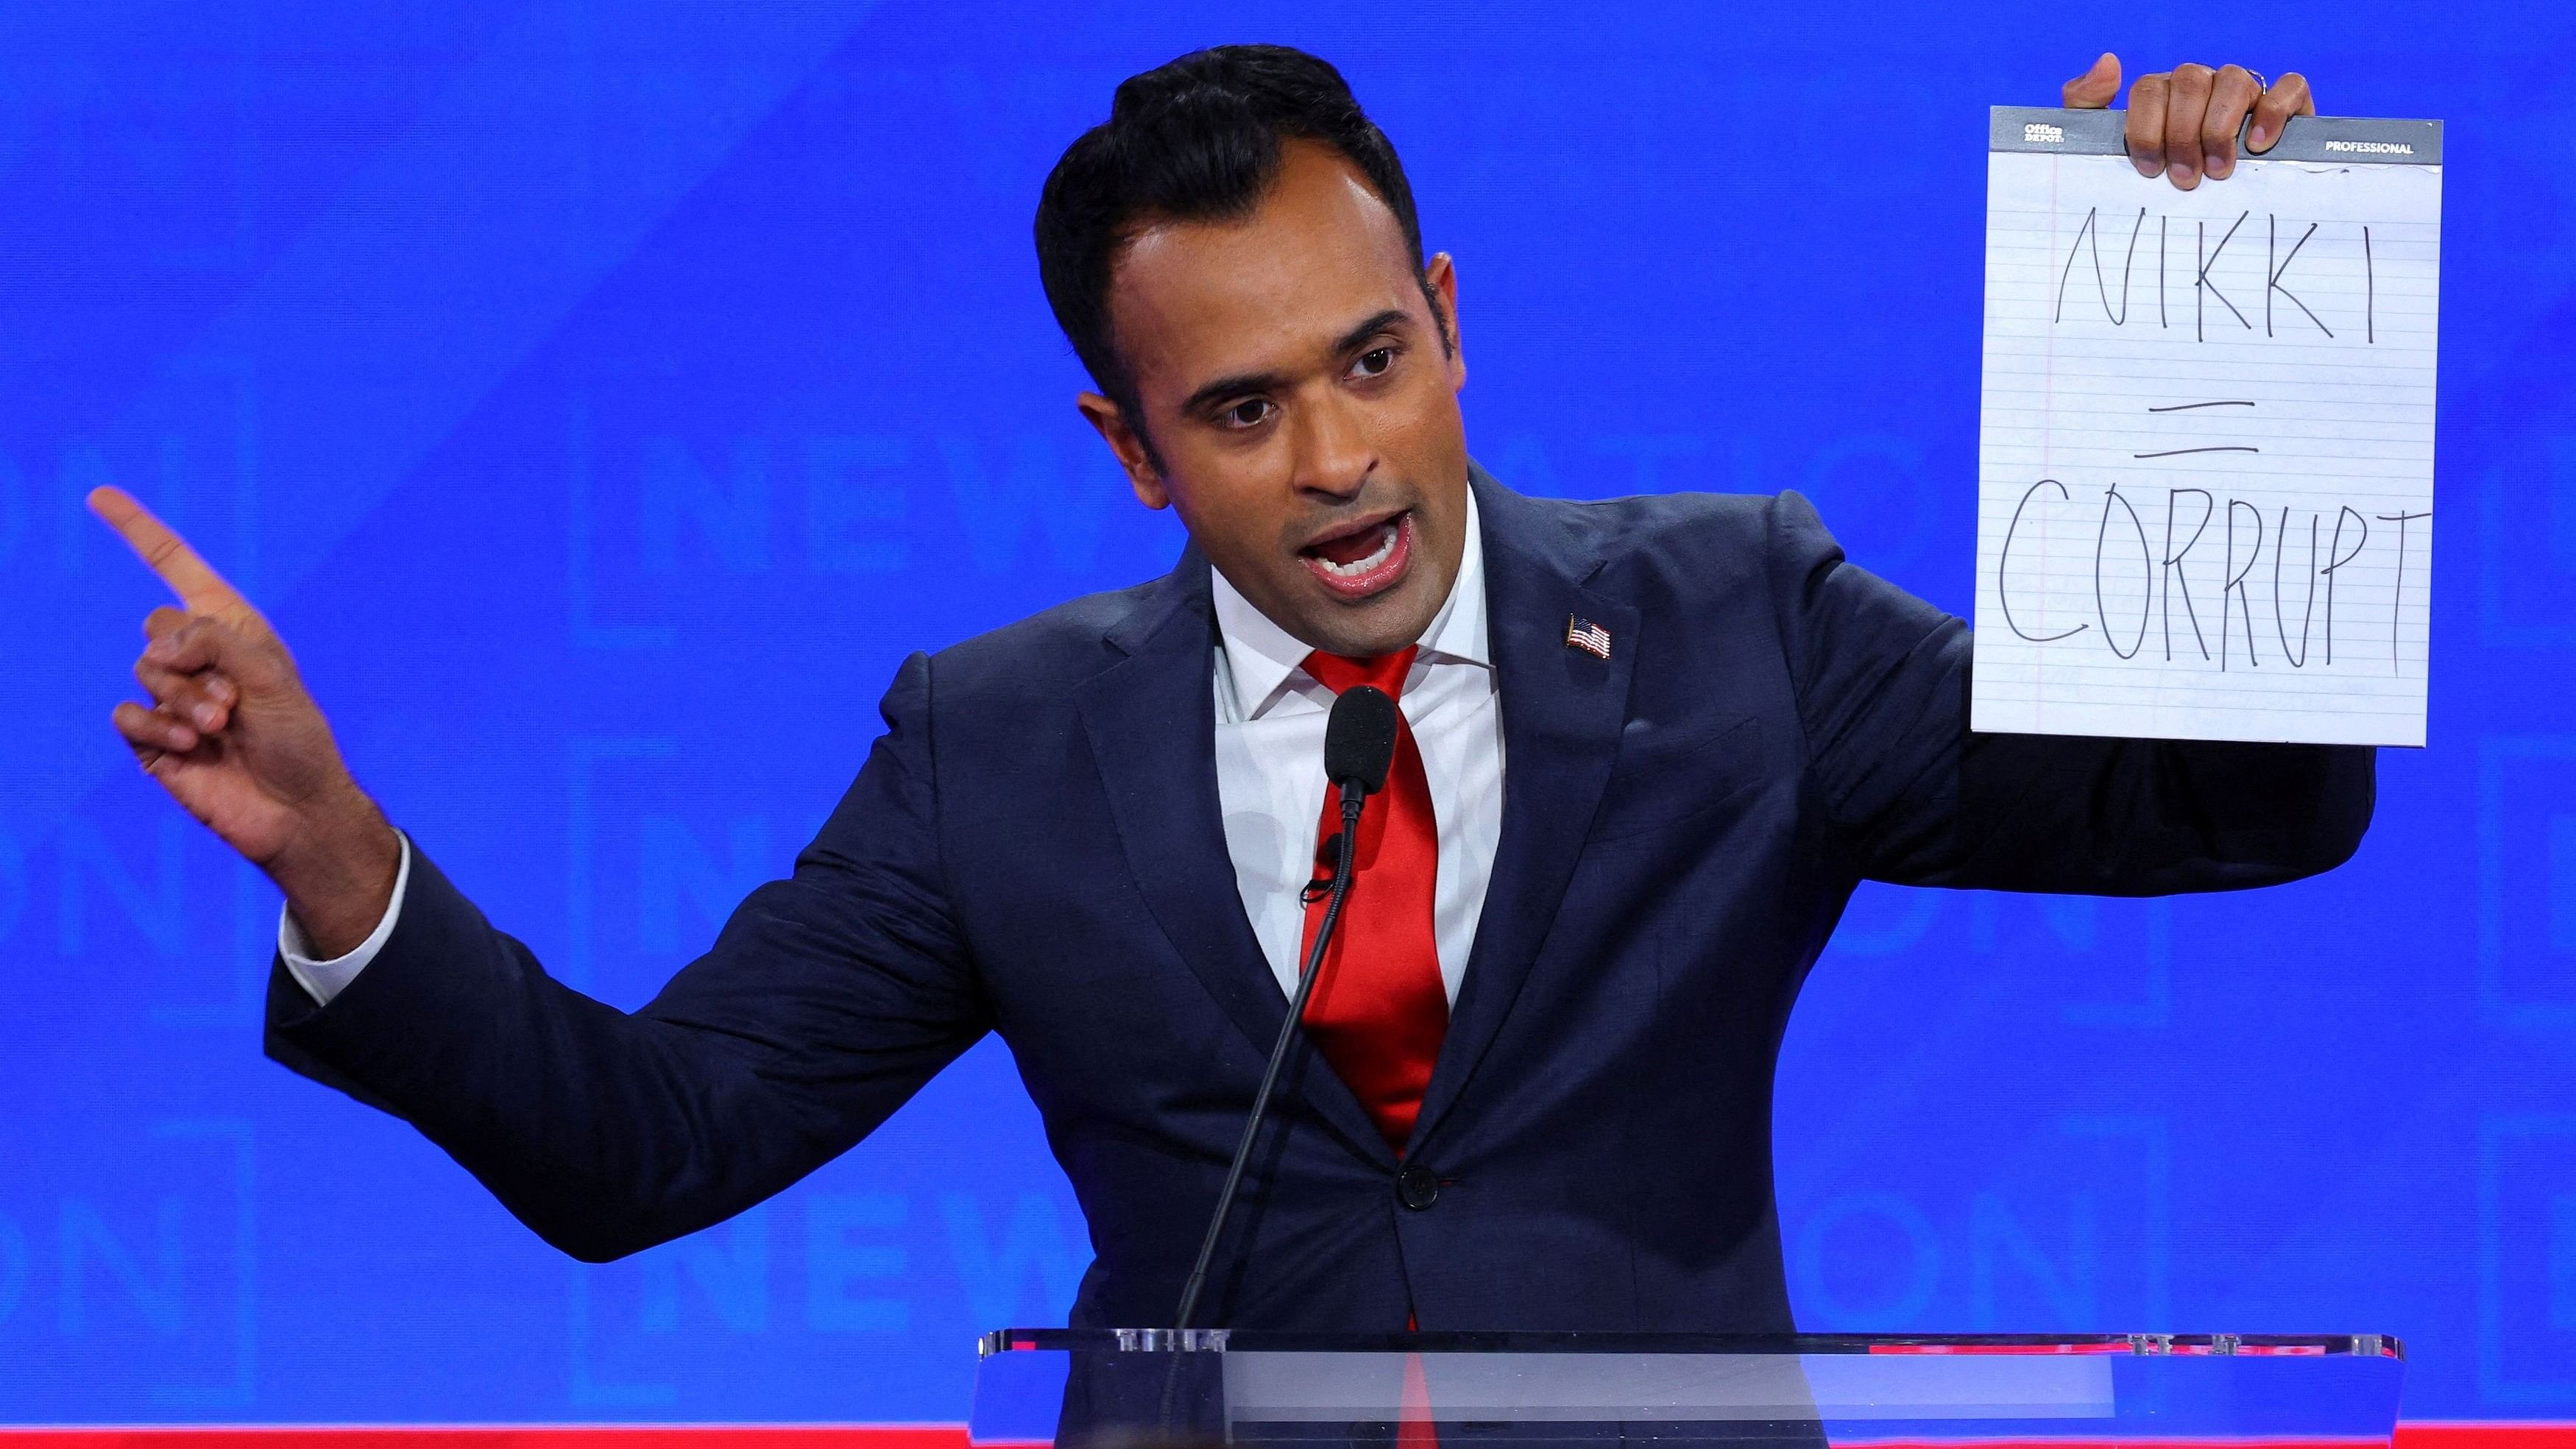 <div class="paragraphs"><p>Republican presidential candidate and businessman Vivek Ramaswamy holds up a handwritten sign referring to fellow candidate and former U.S. Ambassador to the United Nations Nikki Haley.</p></div>